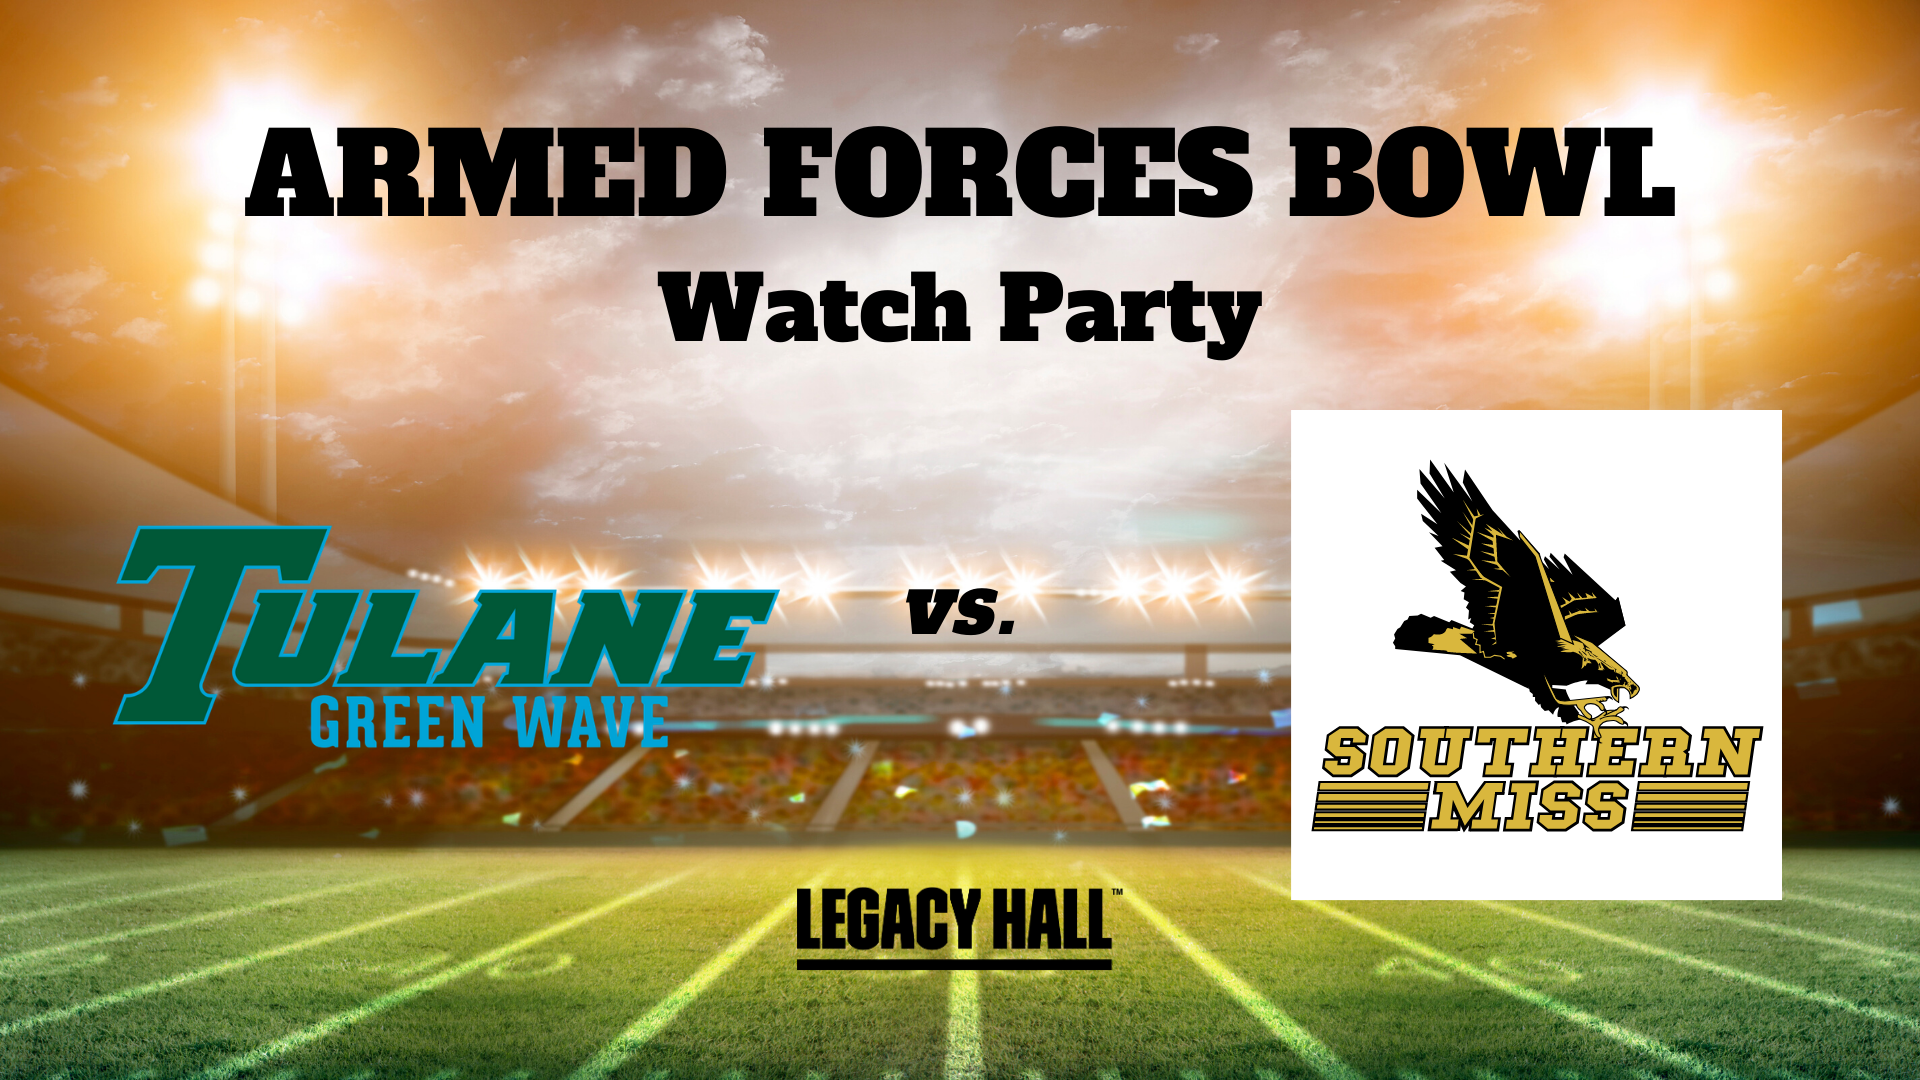 Armed Forces Bowl Watch Party - hero